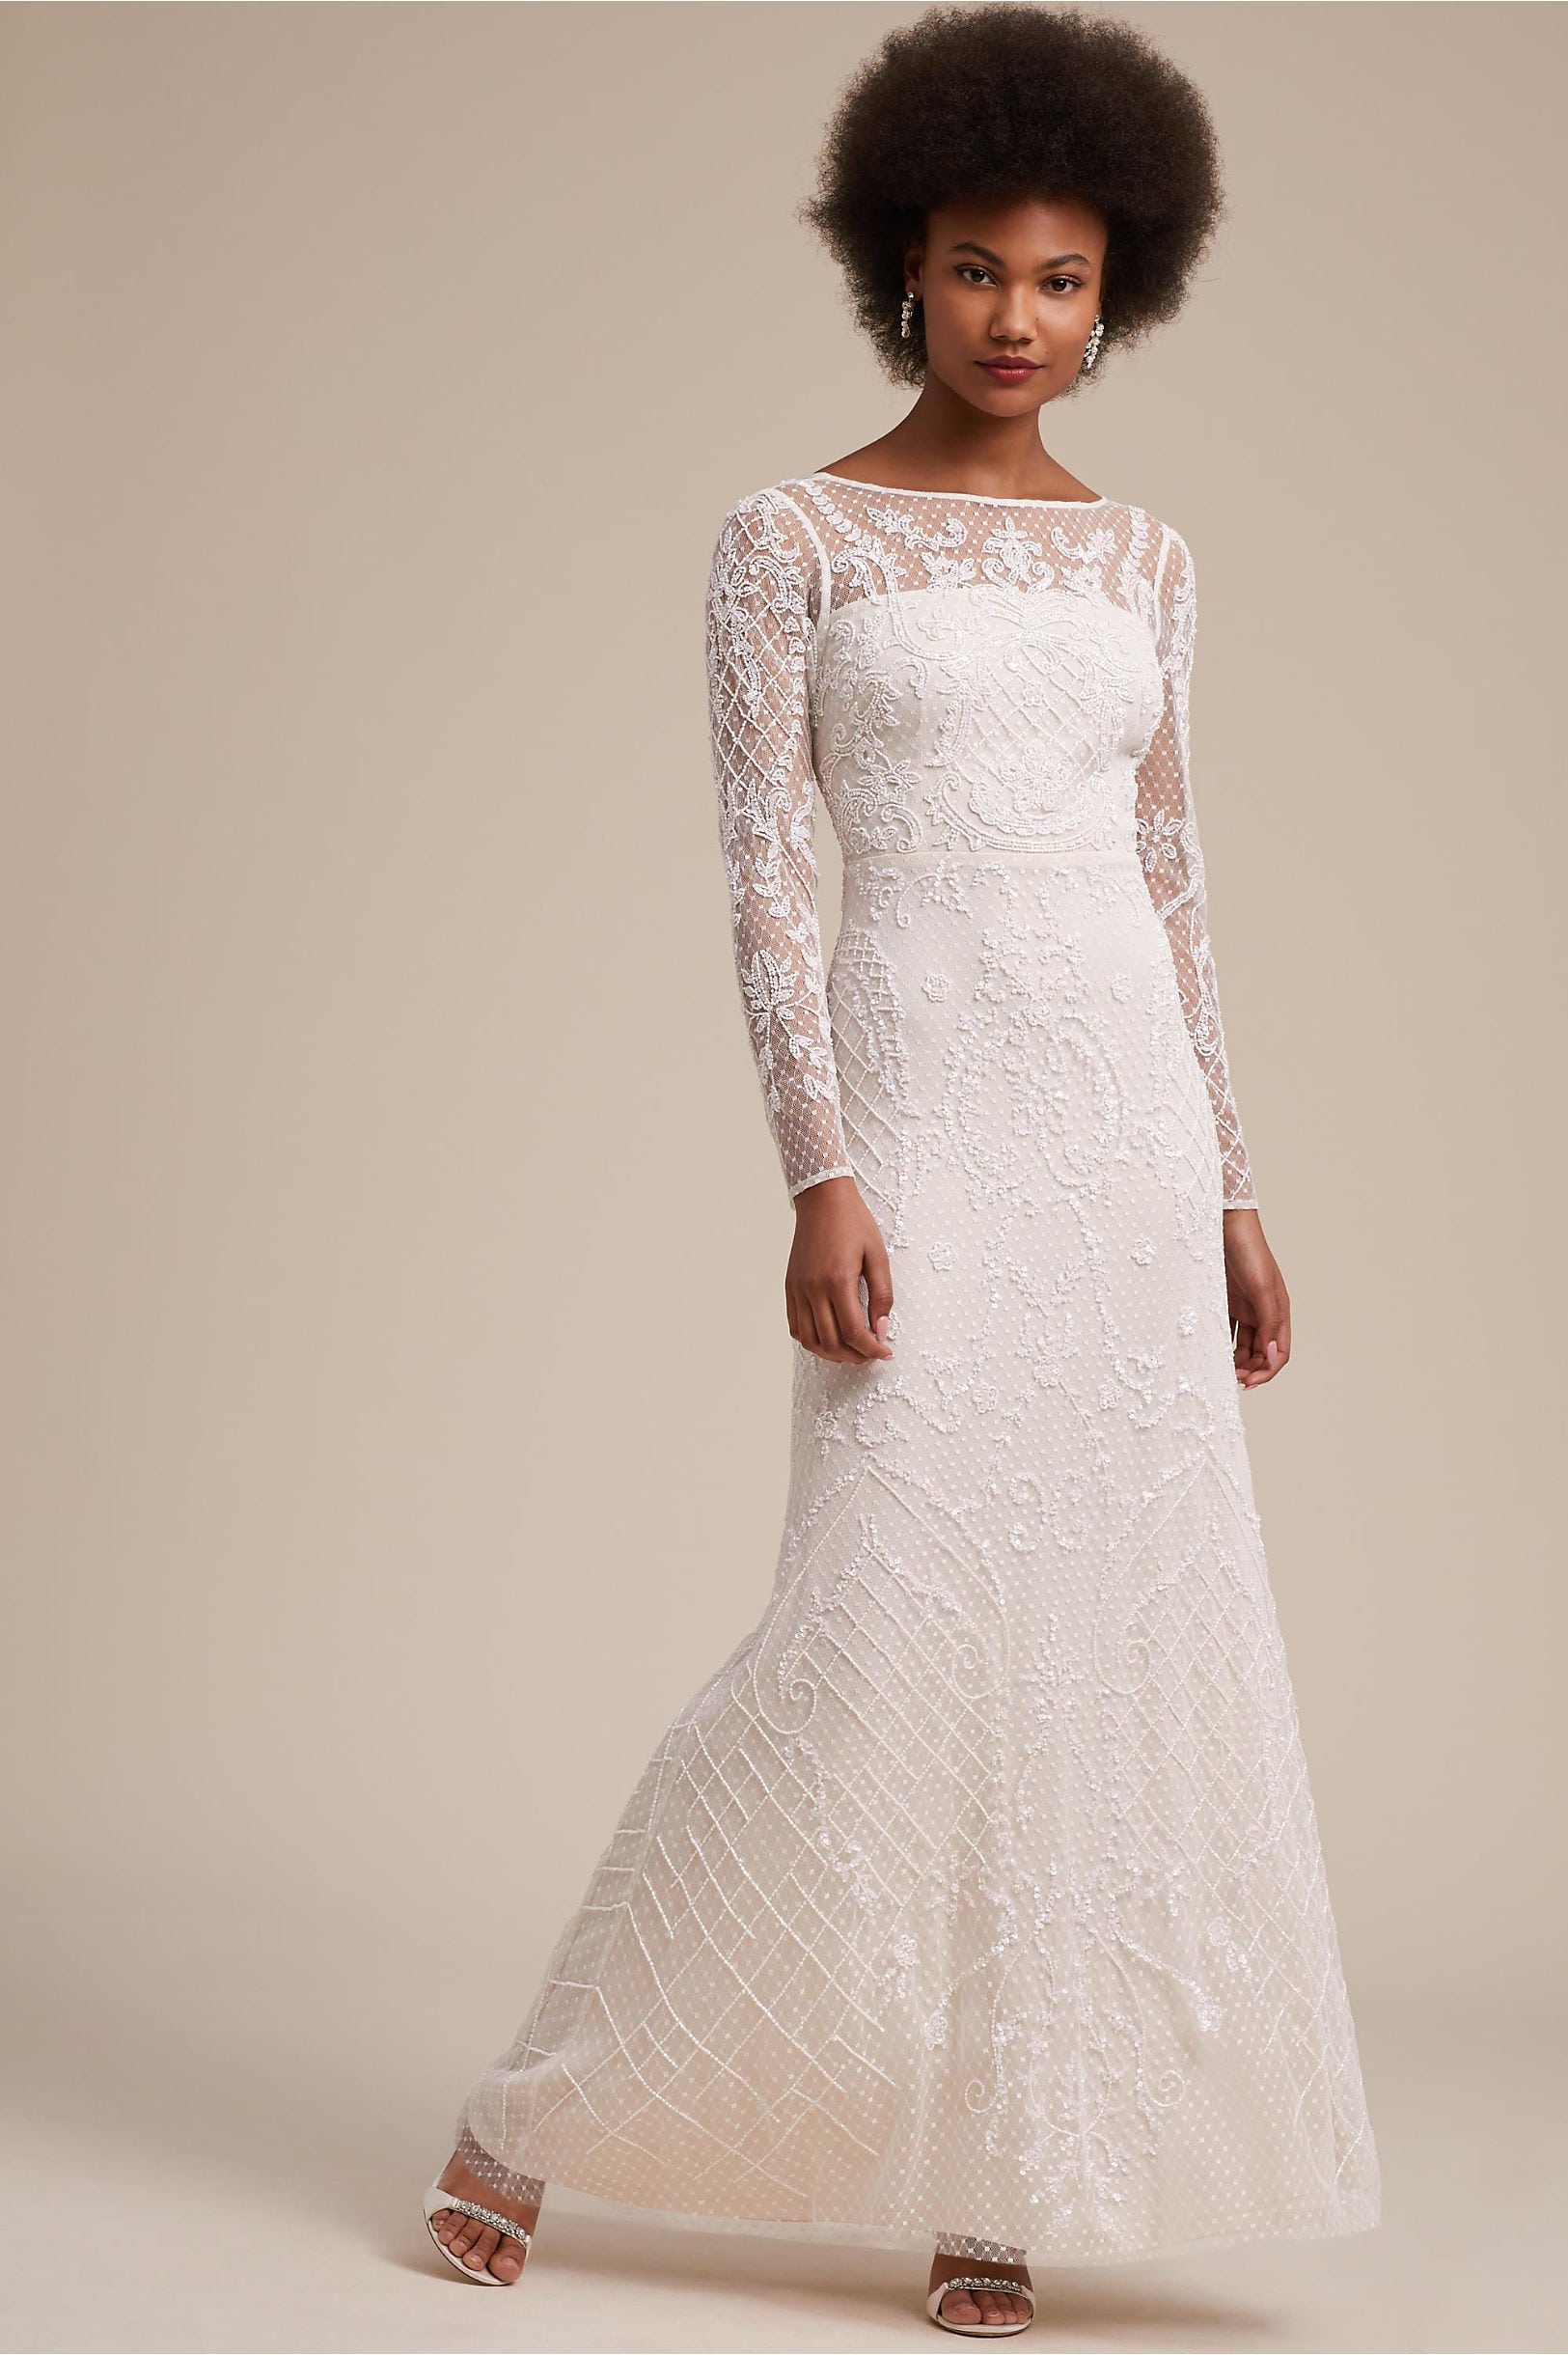 Leon Dress from BHLDN: lace overlay dress with illusion neckline and longsleeves